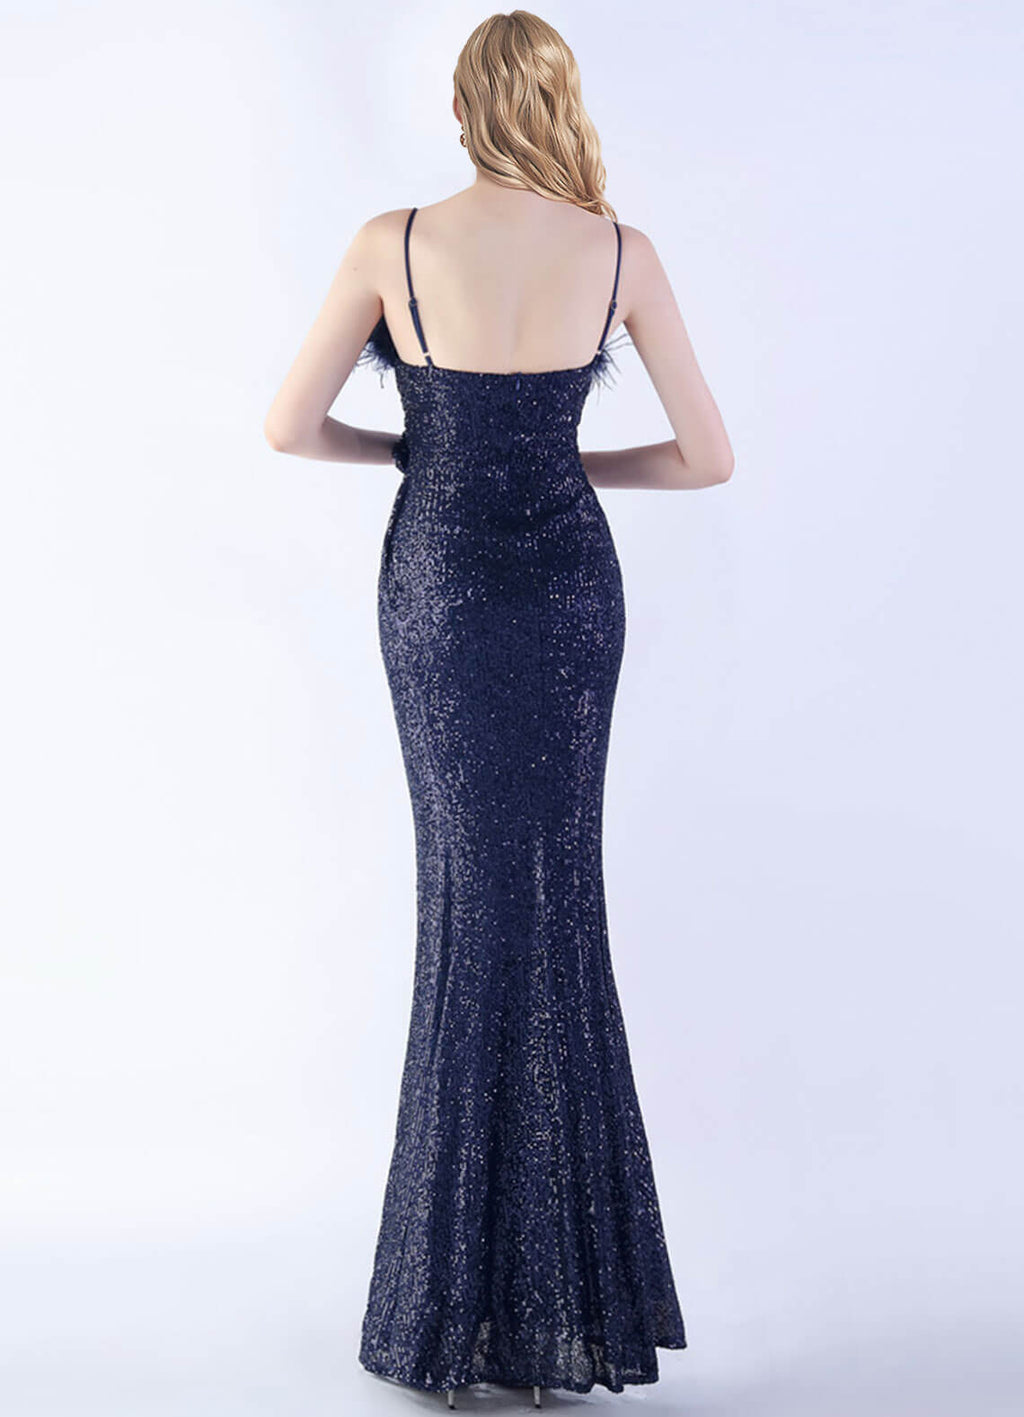 NZ Bridal Navy Blue Feather Sequin Mermaid Maxi Formal Gown 31365 Sadie a